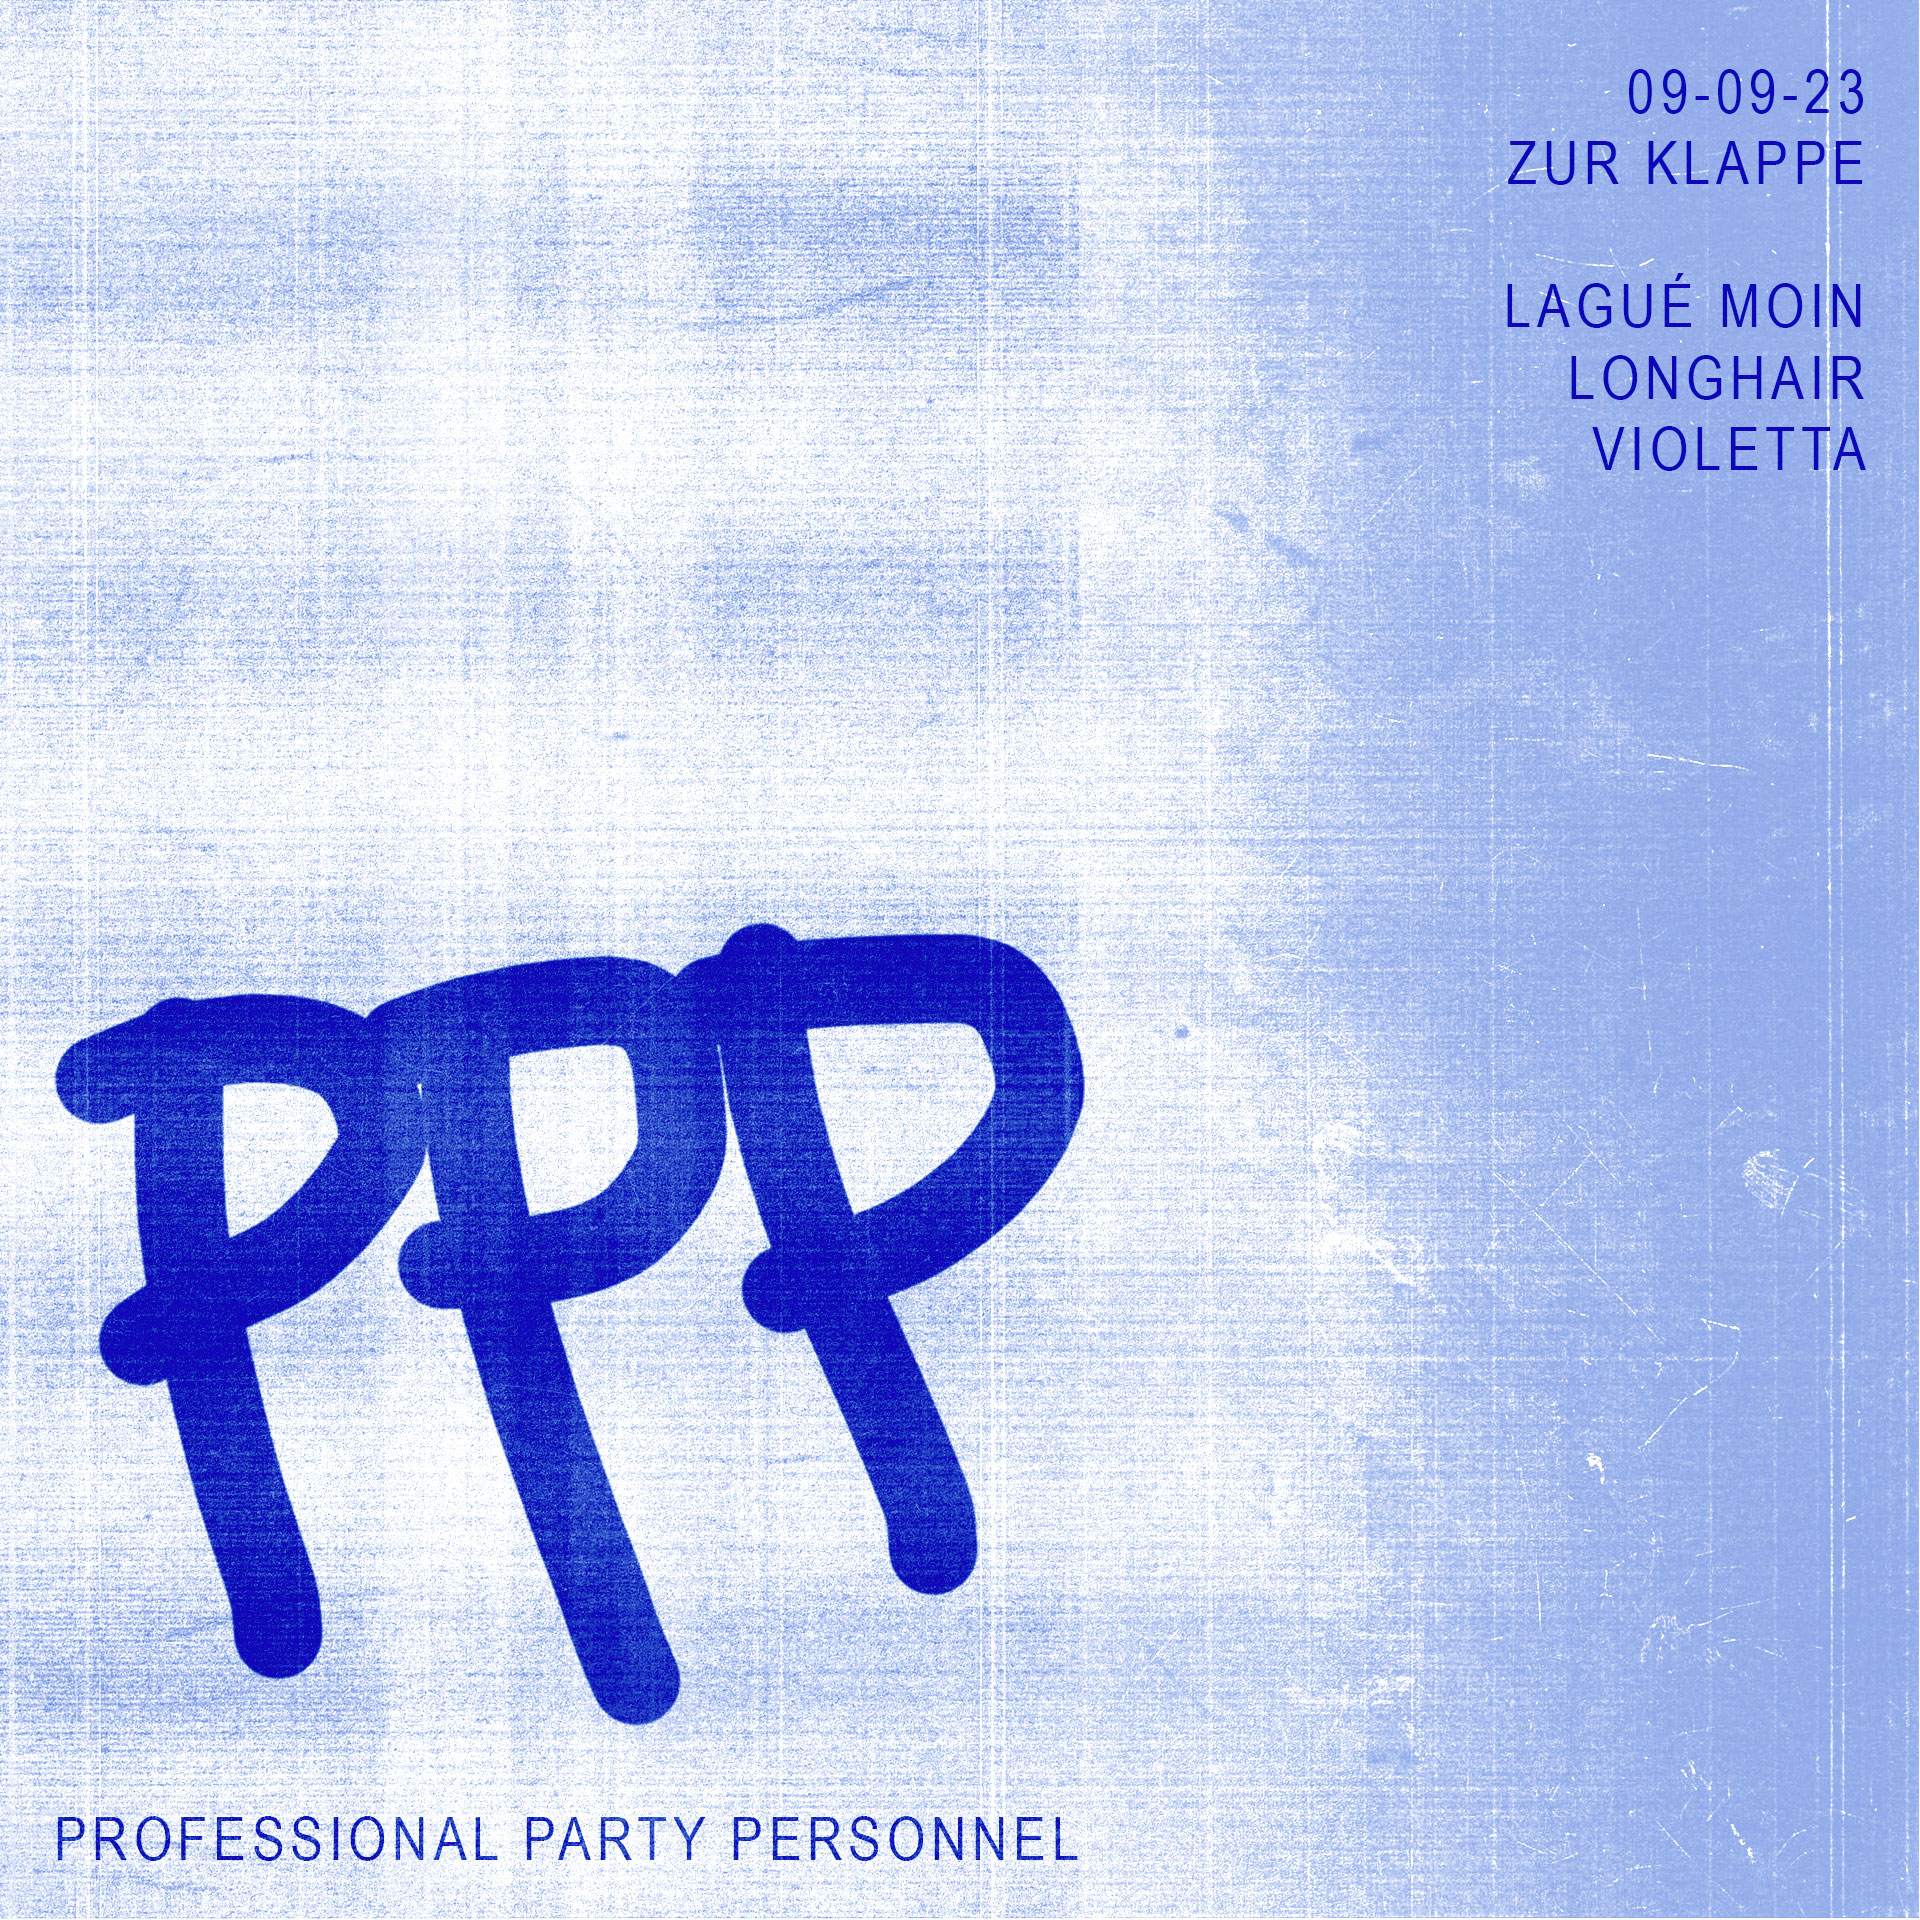 PPP- Professional Party Personnel - Página frontal